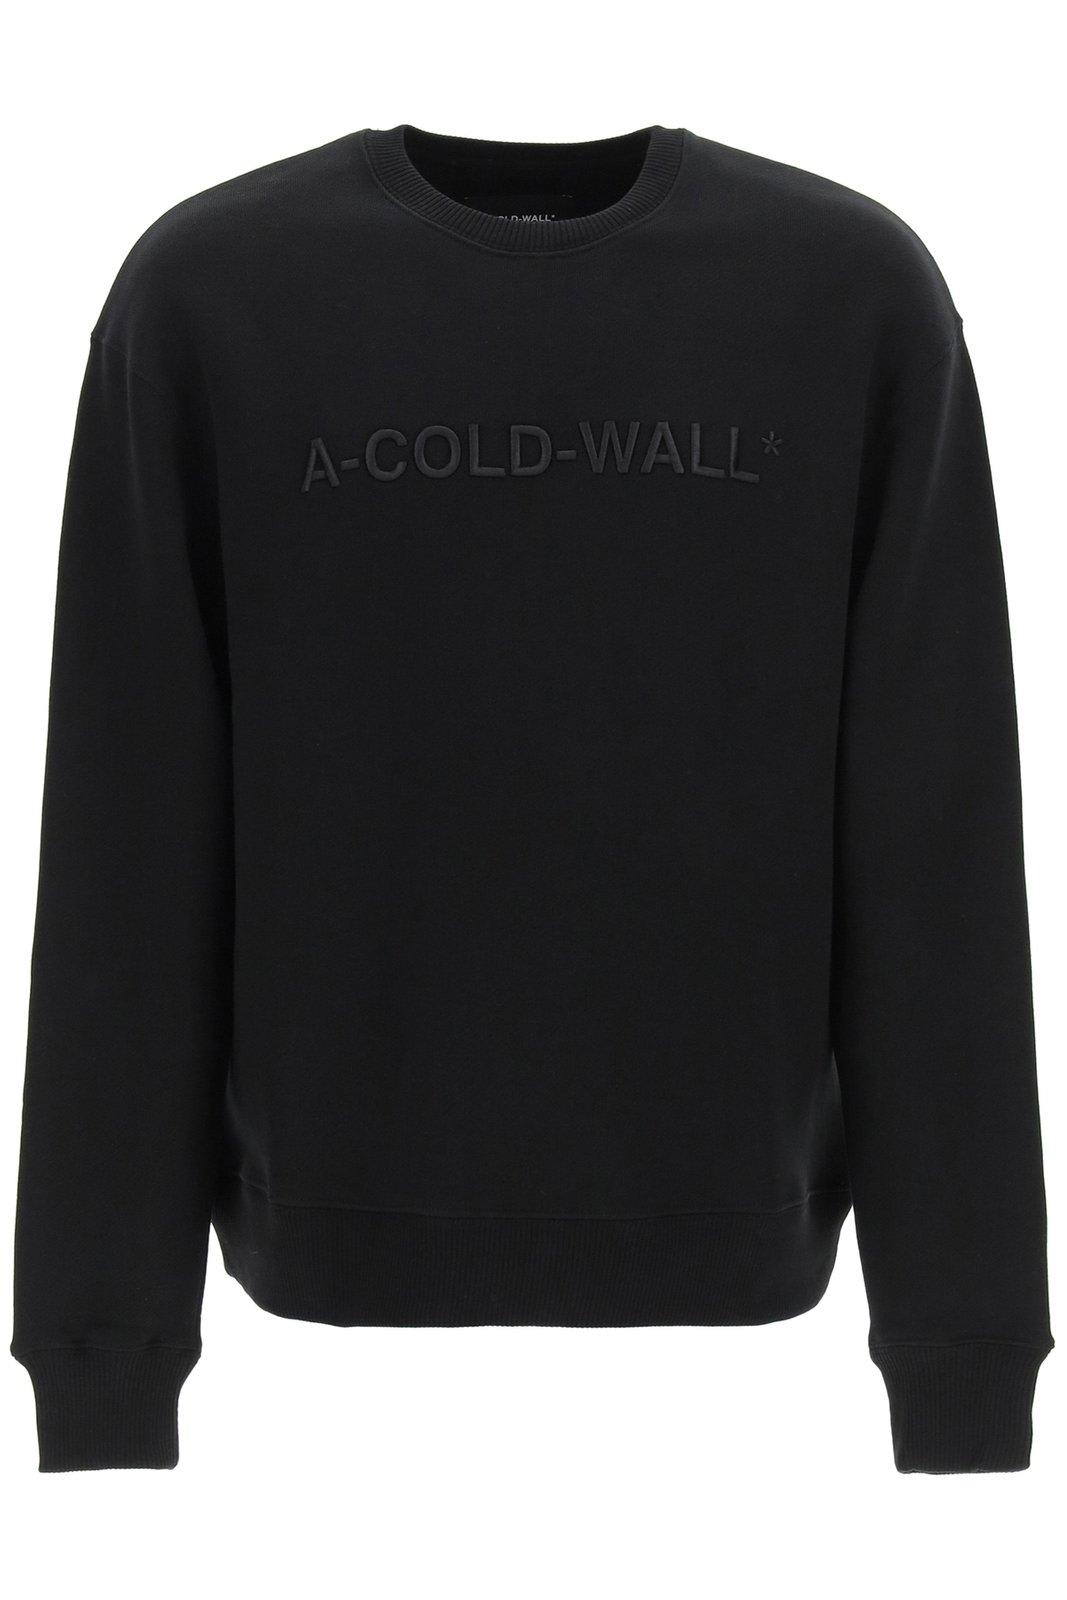 A-COLD-WALL Logo Embroidered Sweatshirt